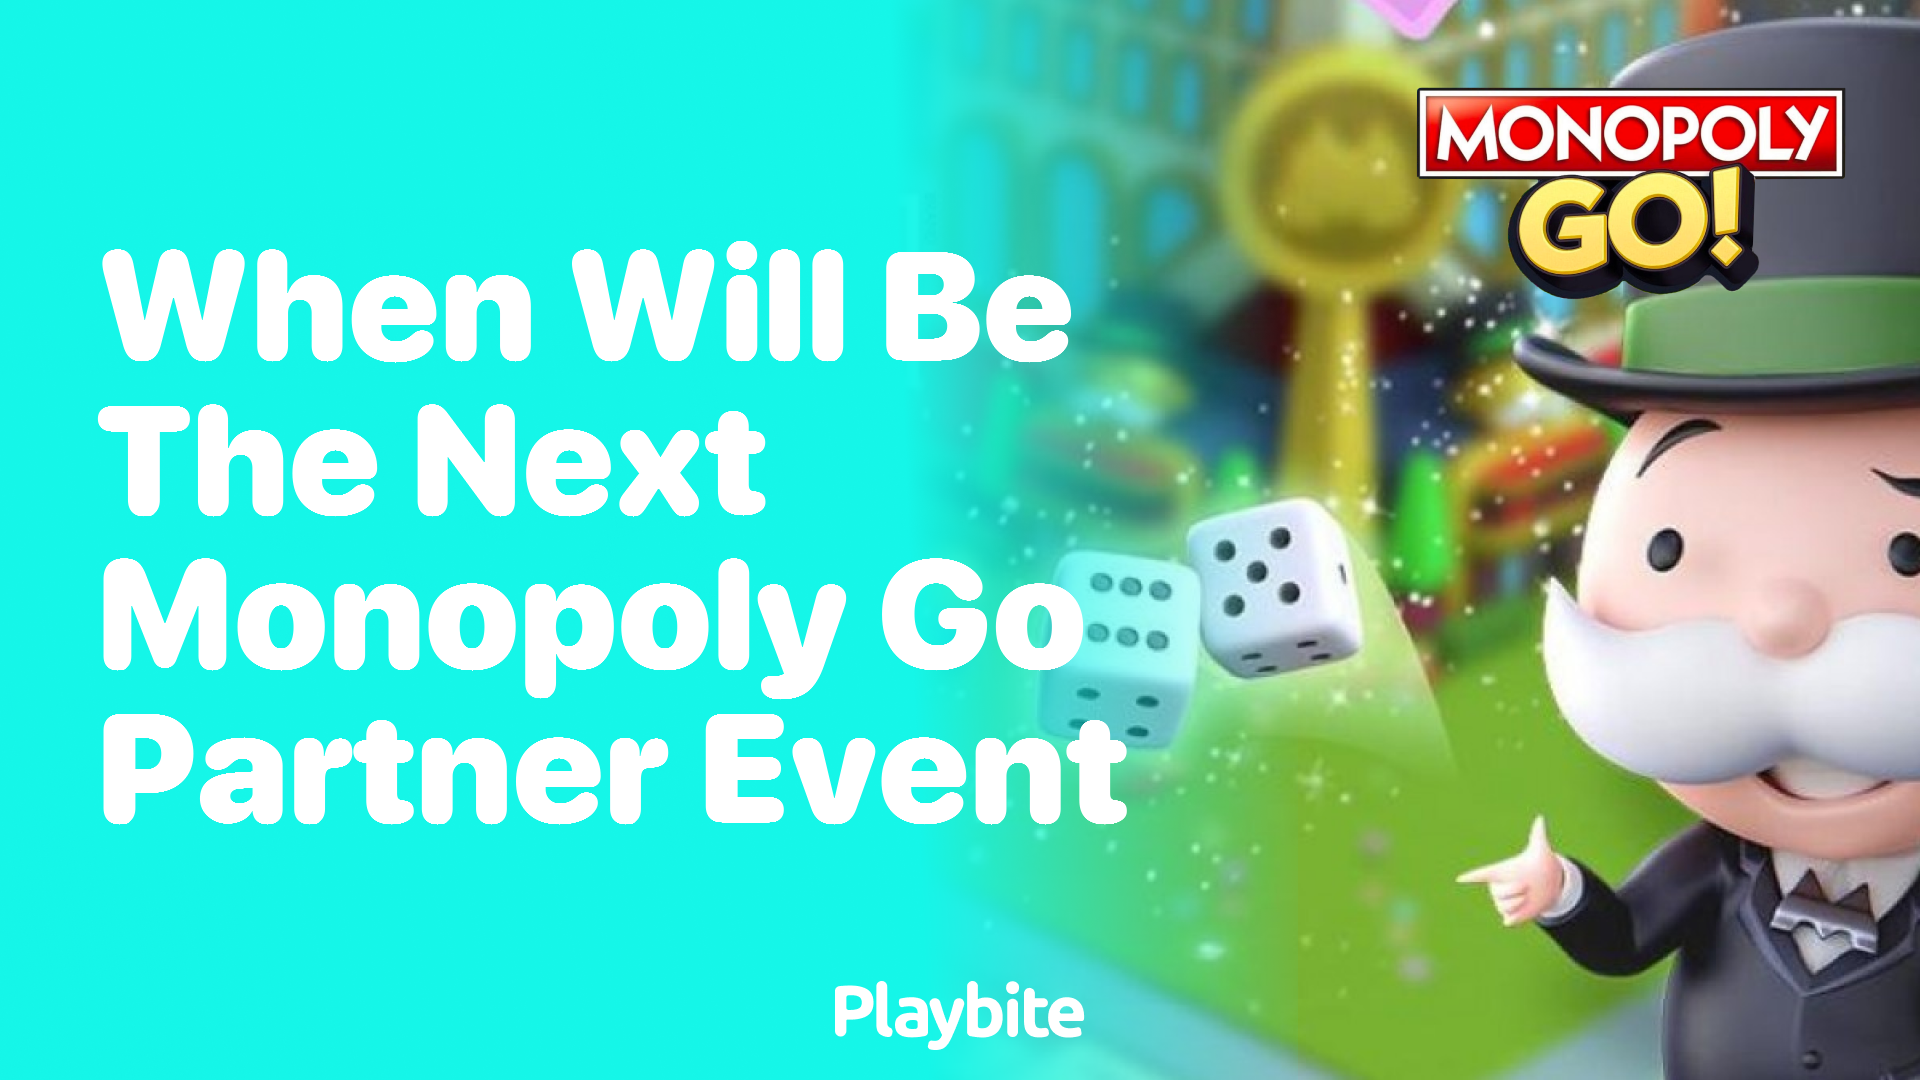 When Will the Next Monopoly Go Partner Event Be?